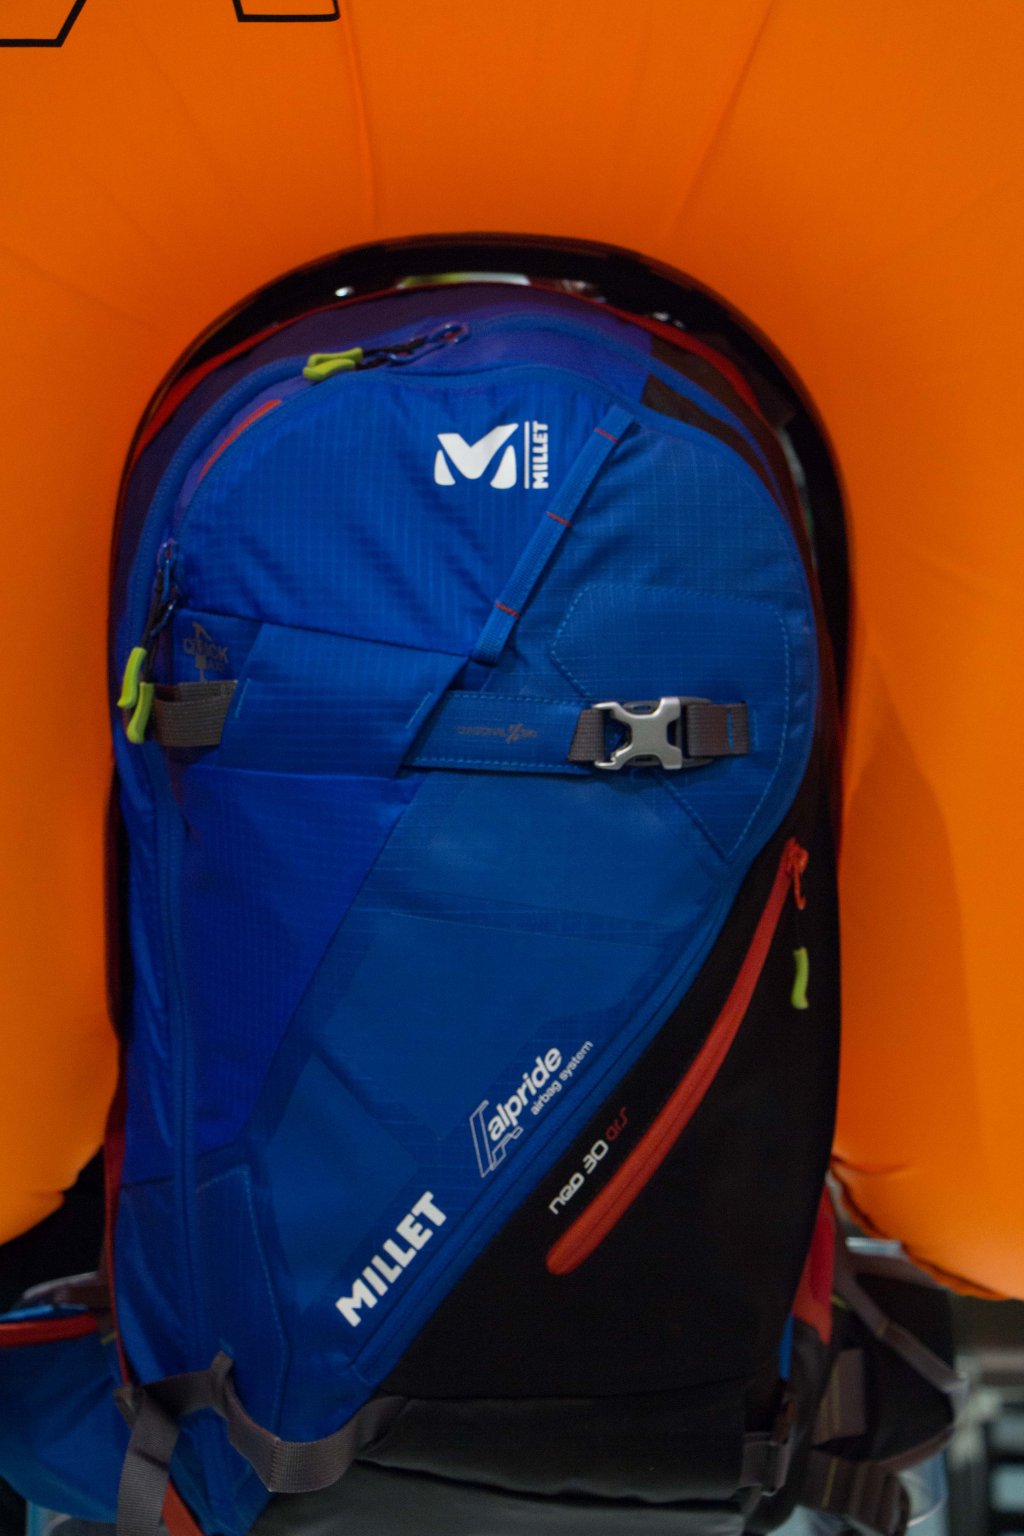 Airbag backpack from Millet based on the Alpride airbag system